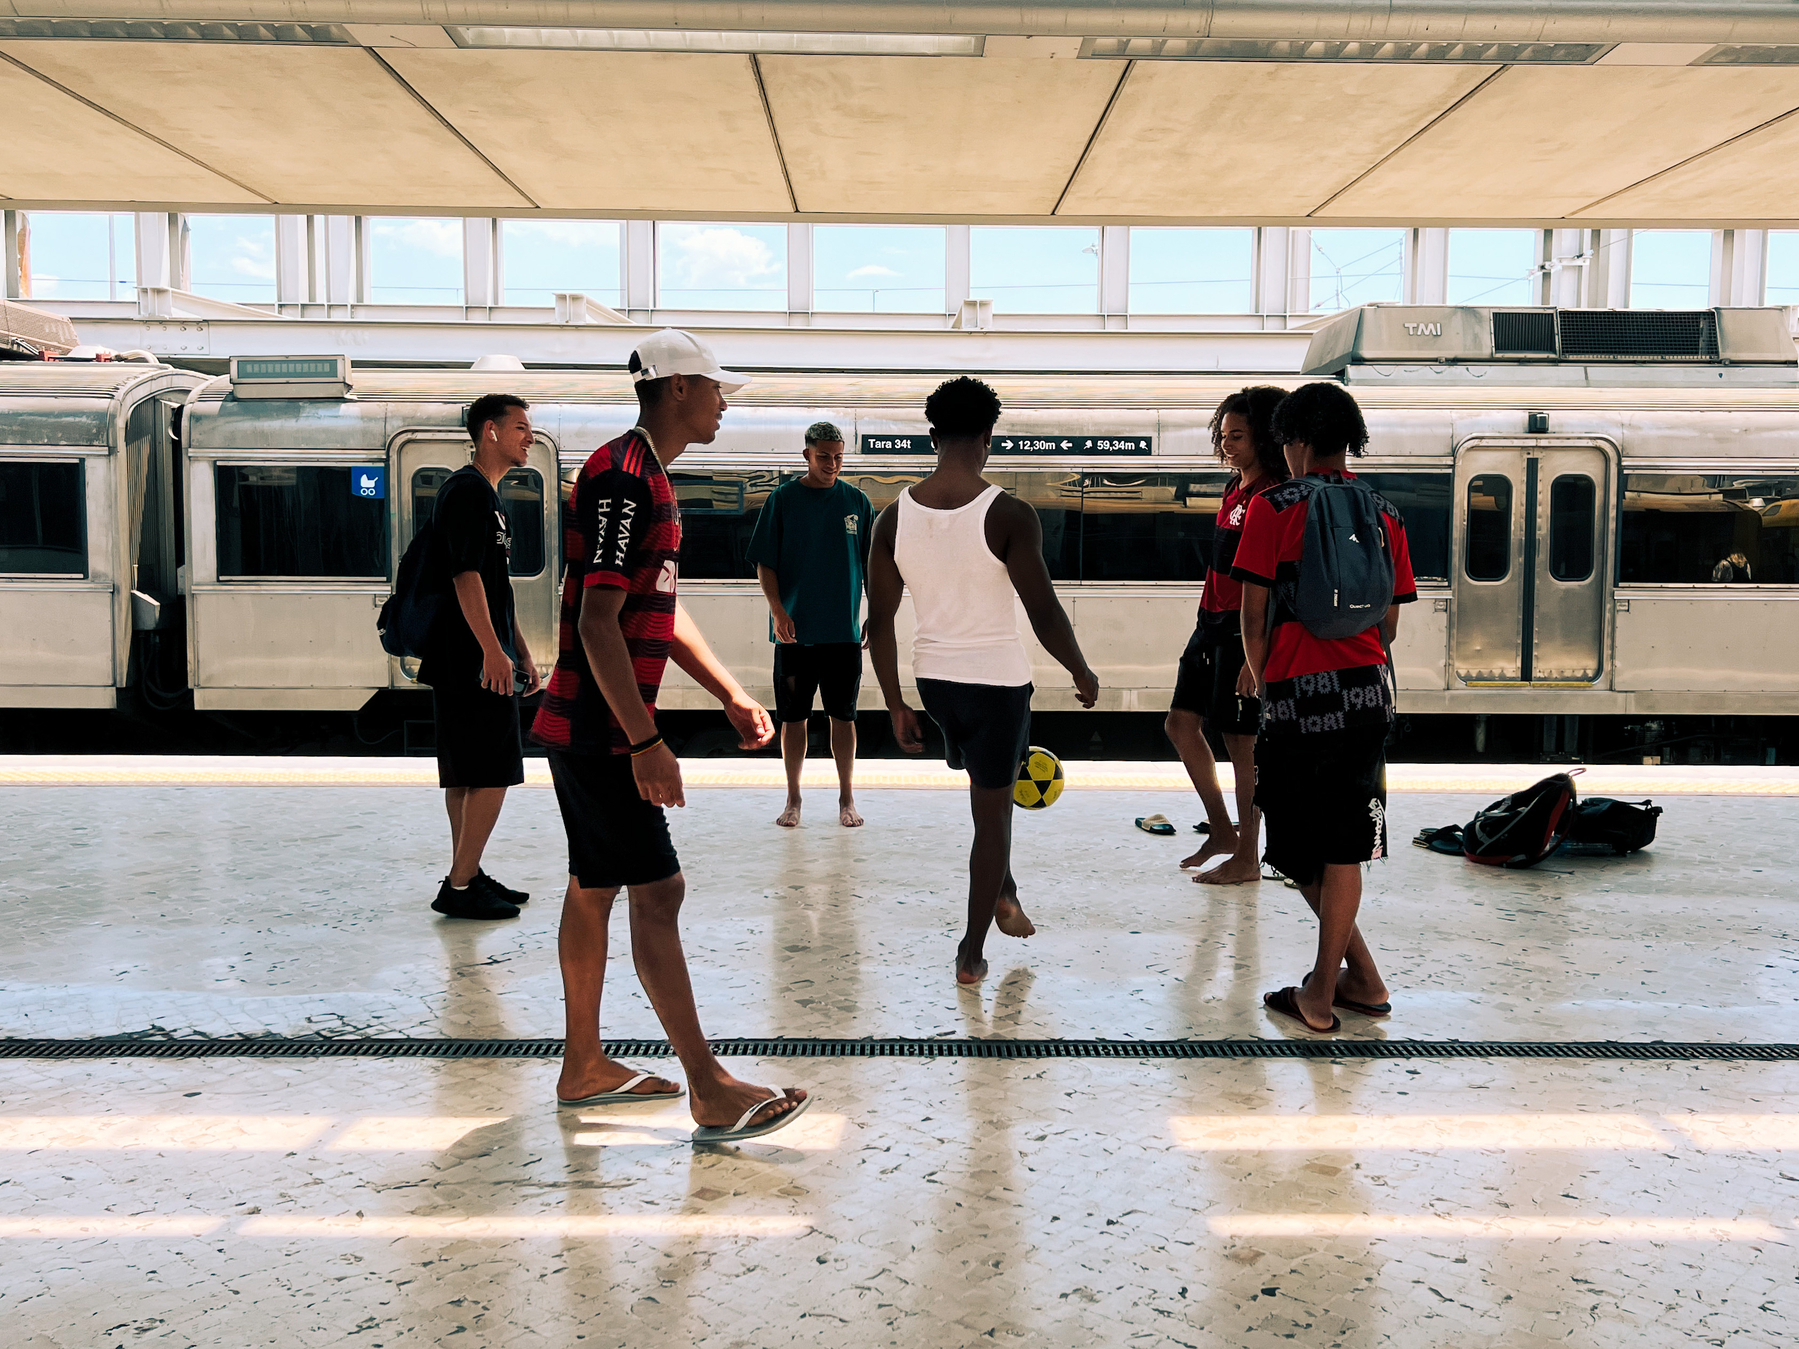 Kids playing football in the train station. 